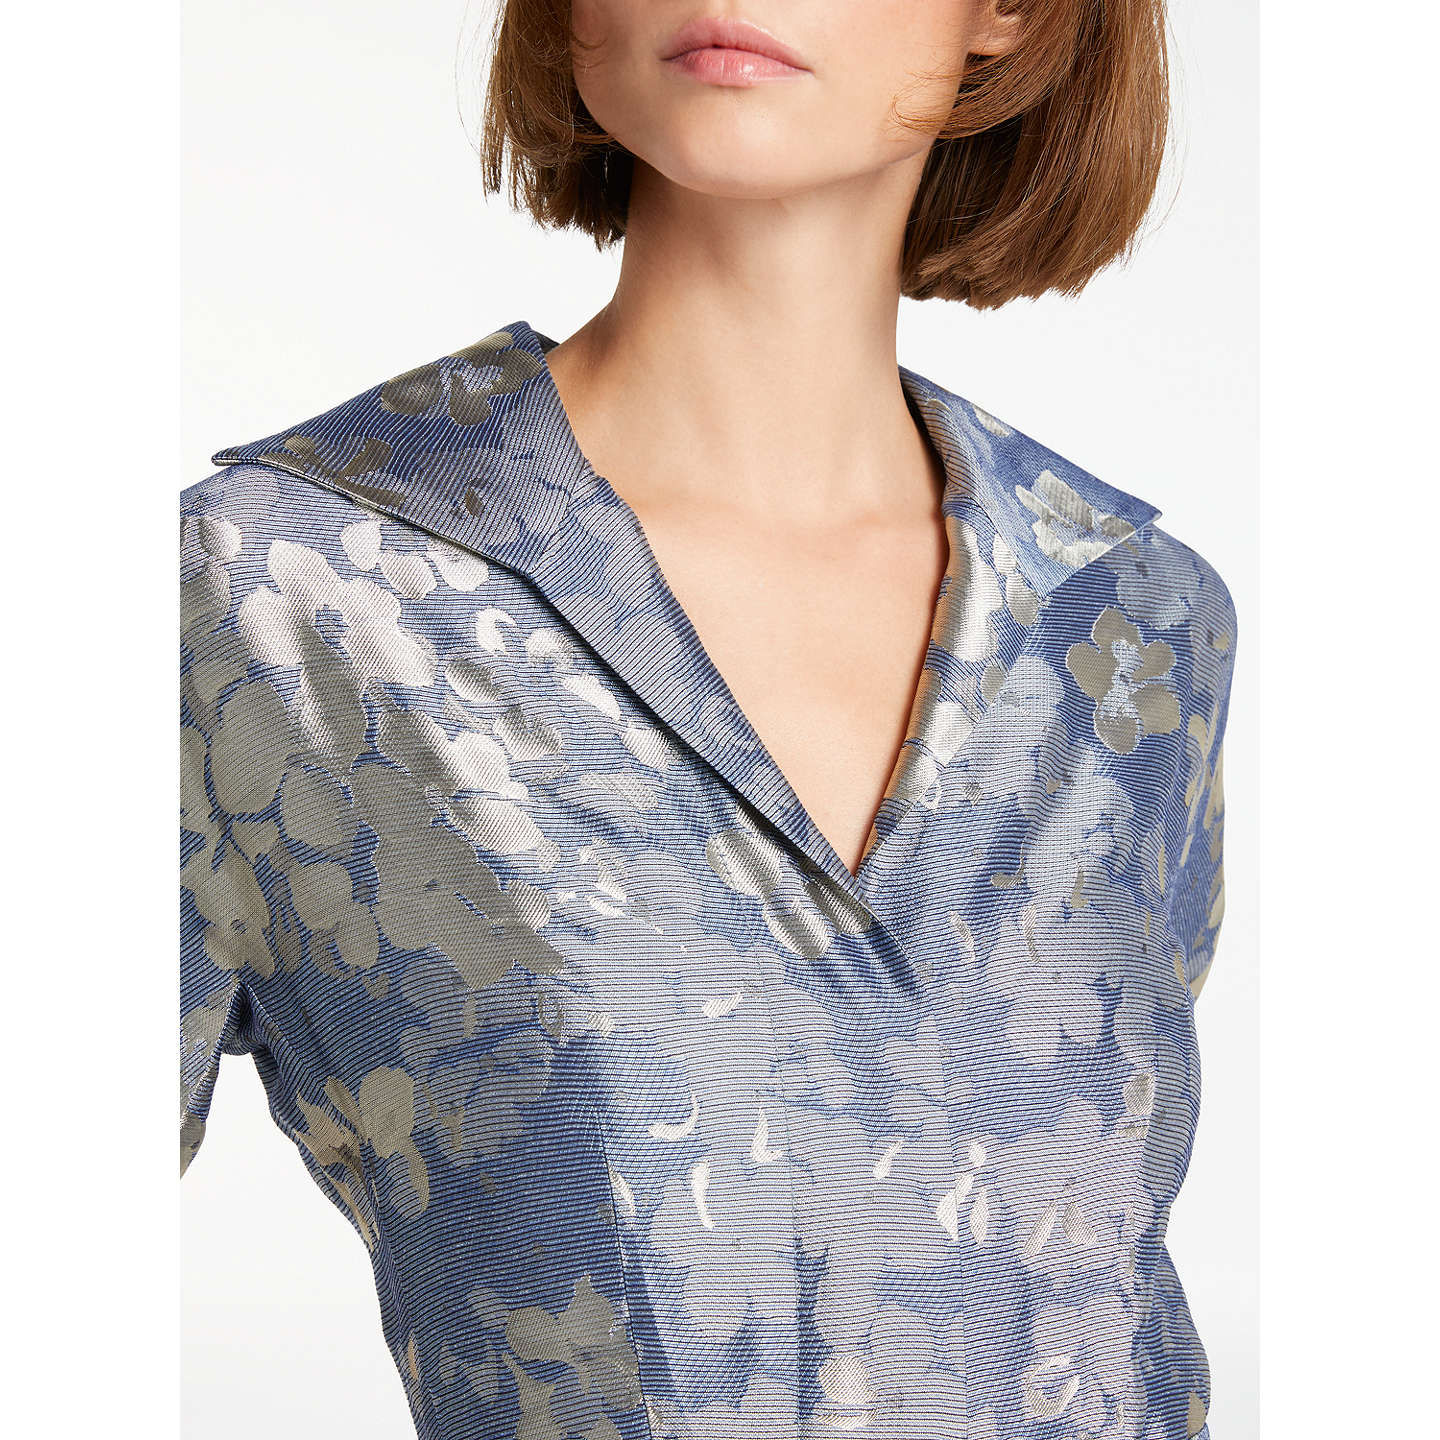 Bruce by Bruce Oldfield Floral Jacquard Dress, Blue at John Lewis